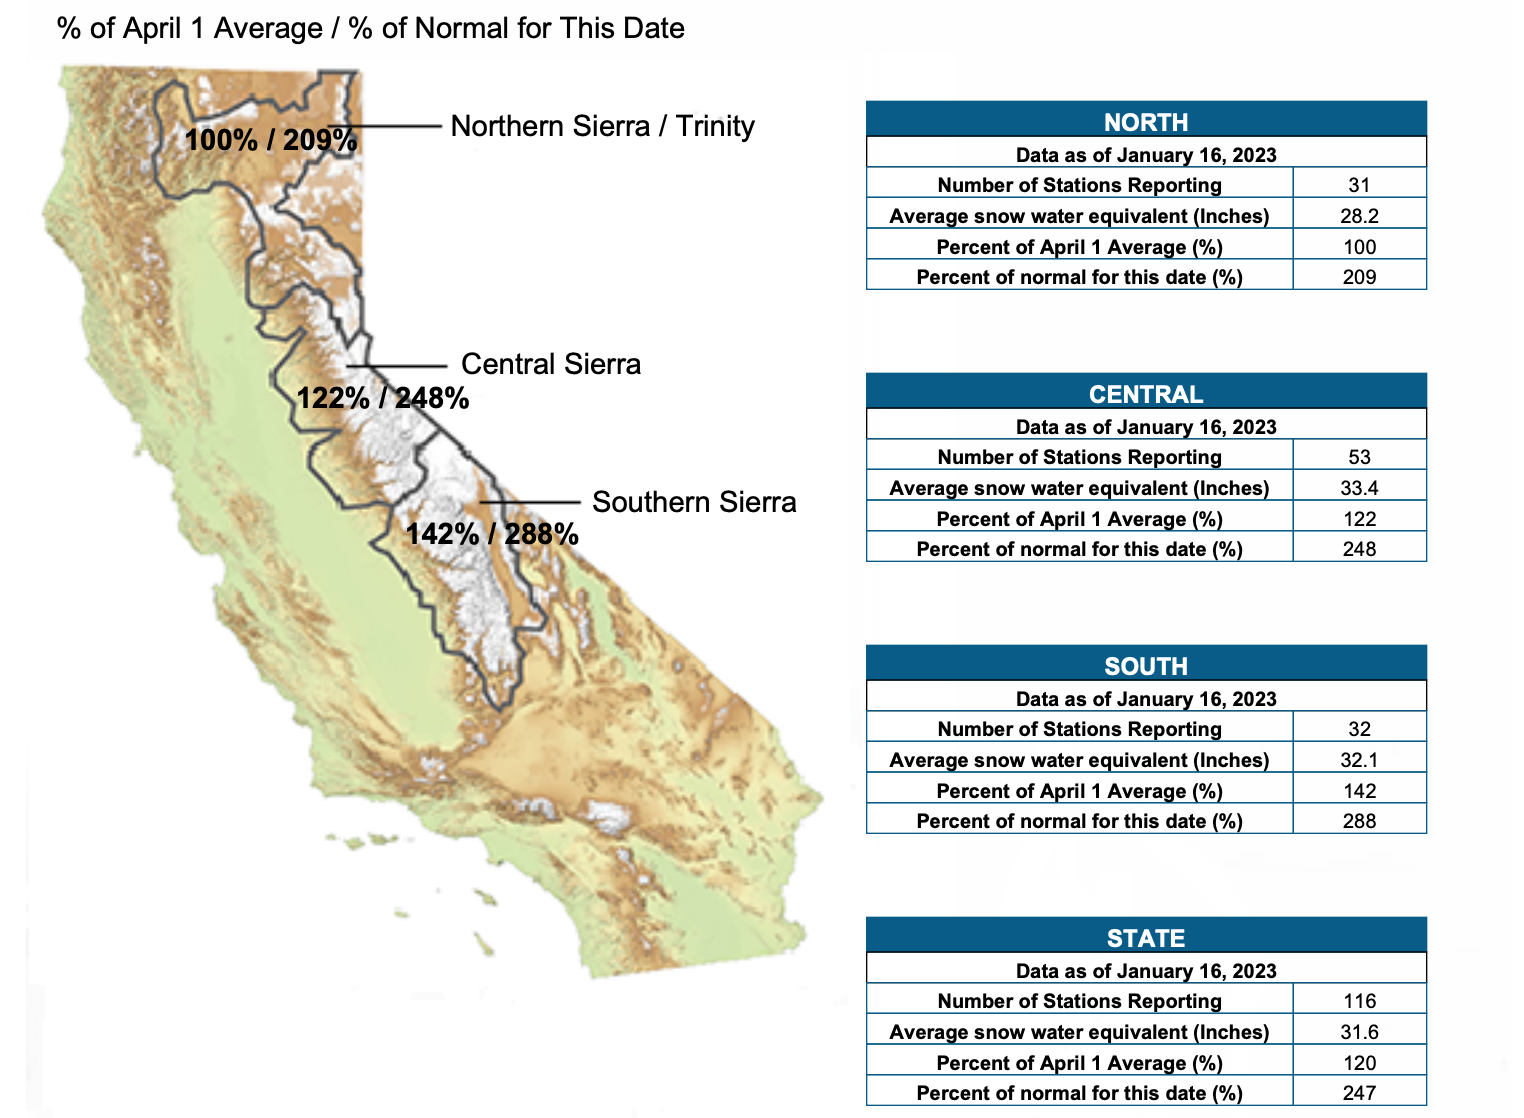 Screenshot of a map showing a snowpack in California that is 245% of normal and 120% of peak average snow.